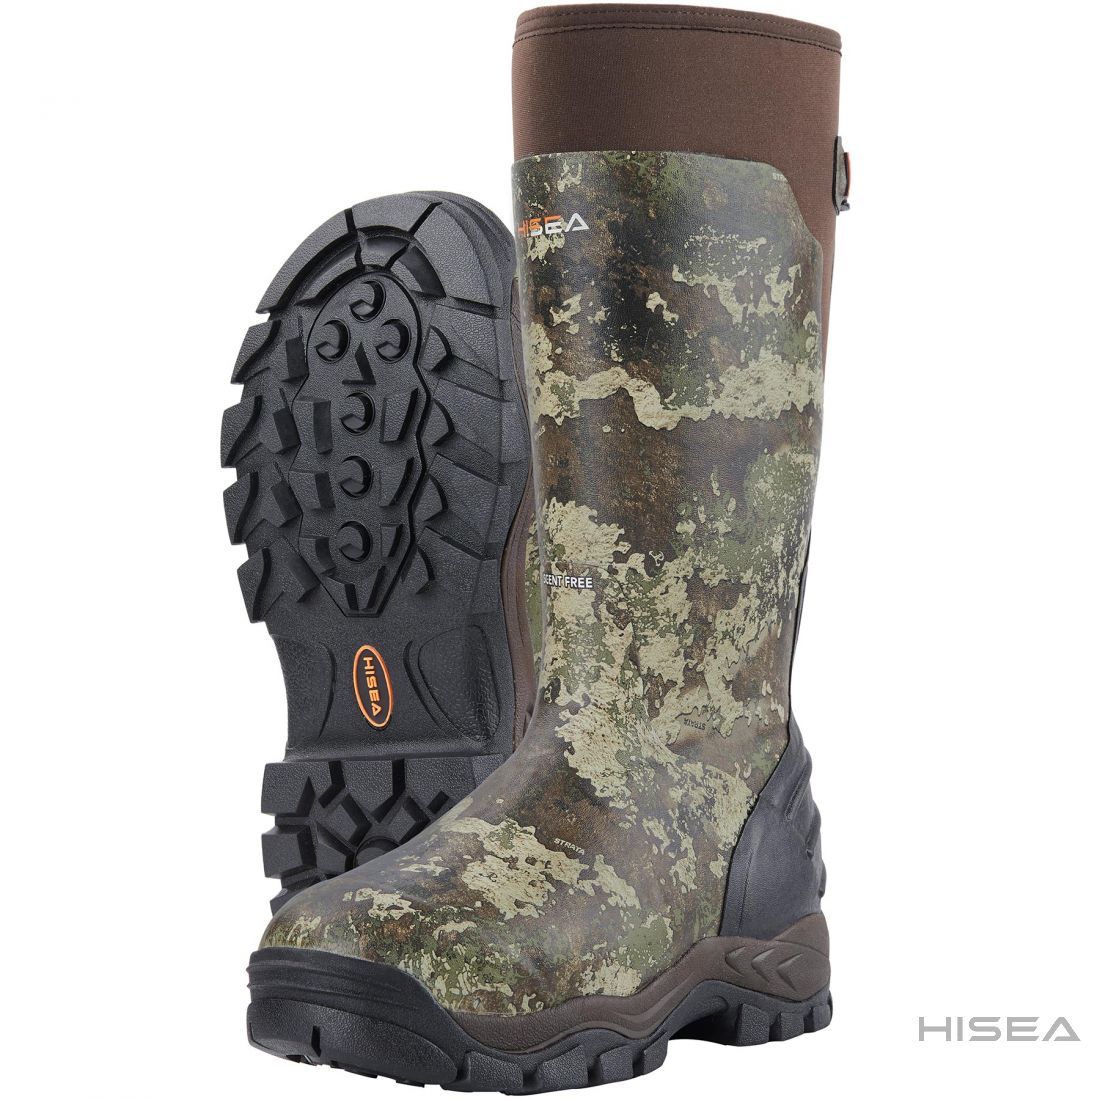 Apollo Pro 400G Insulated Hunting Boots